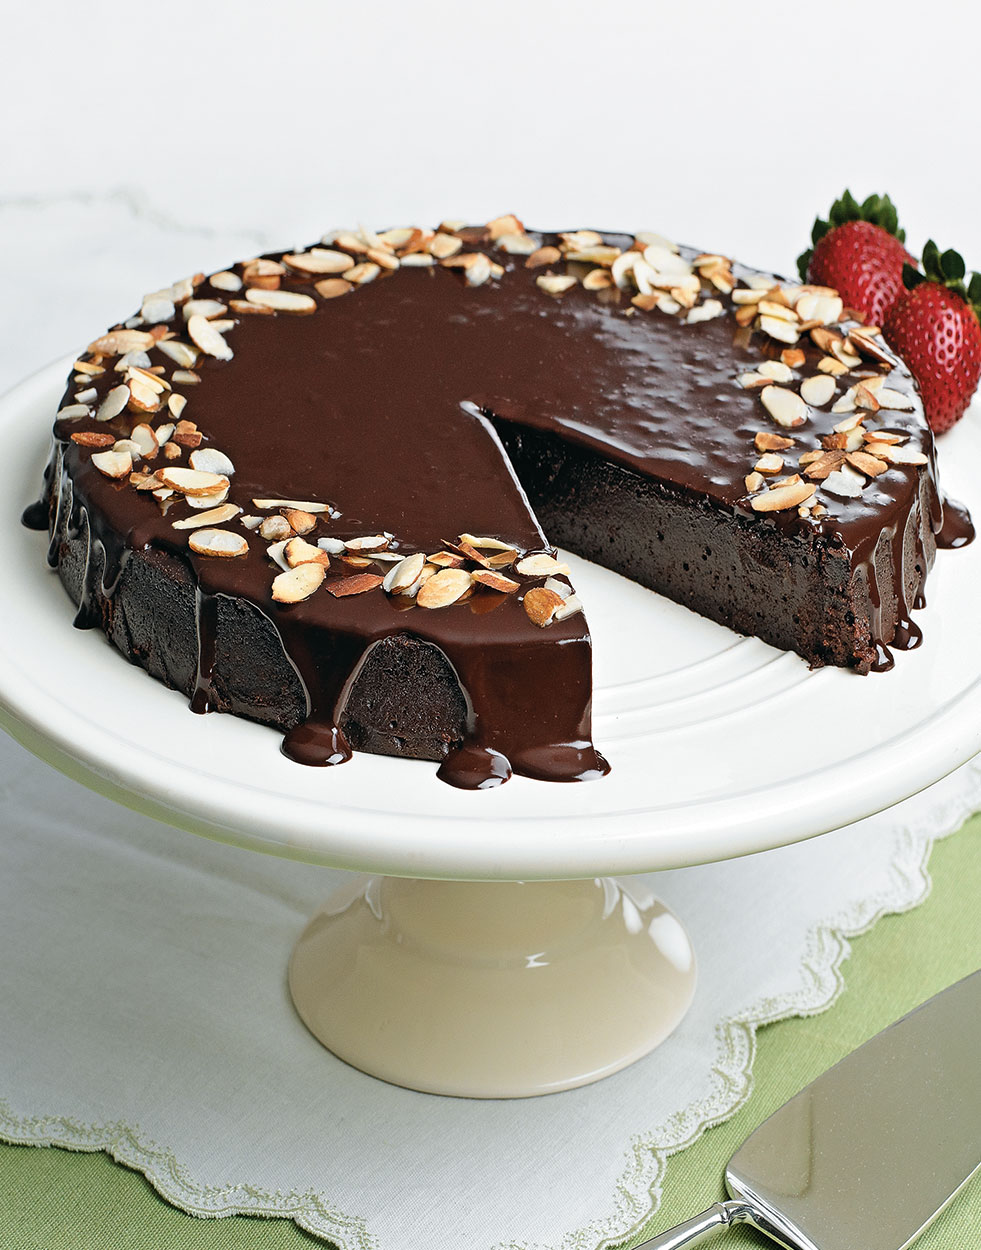 Chocolate-Almond Torte with Ganache Topping